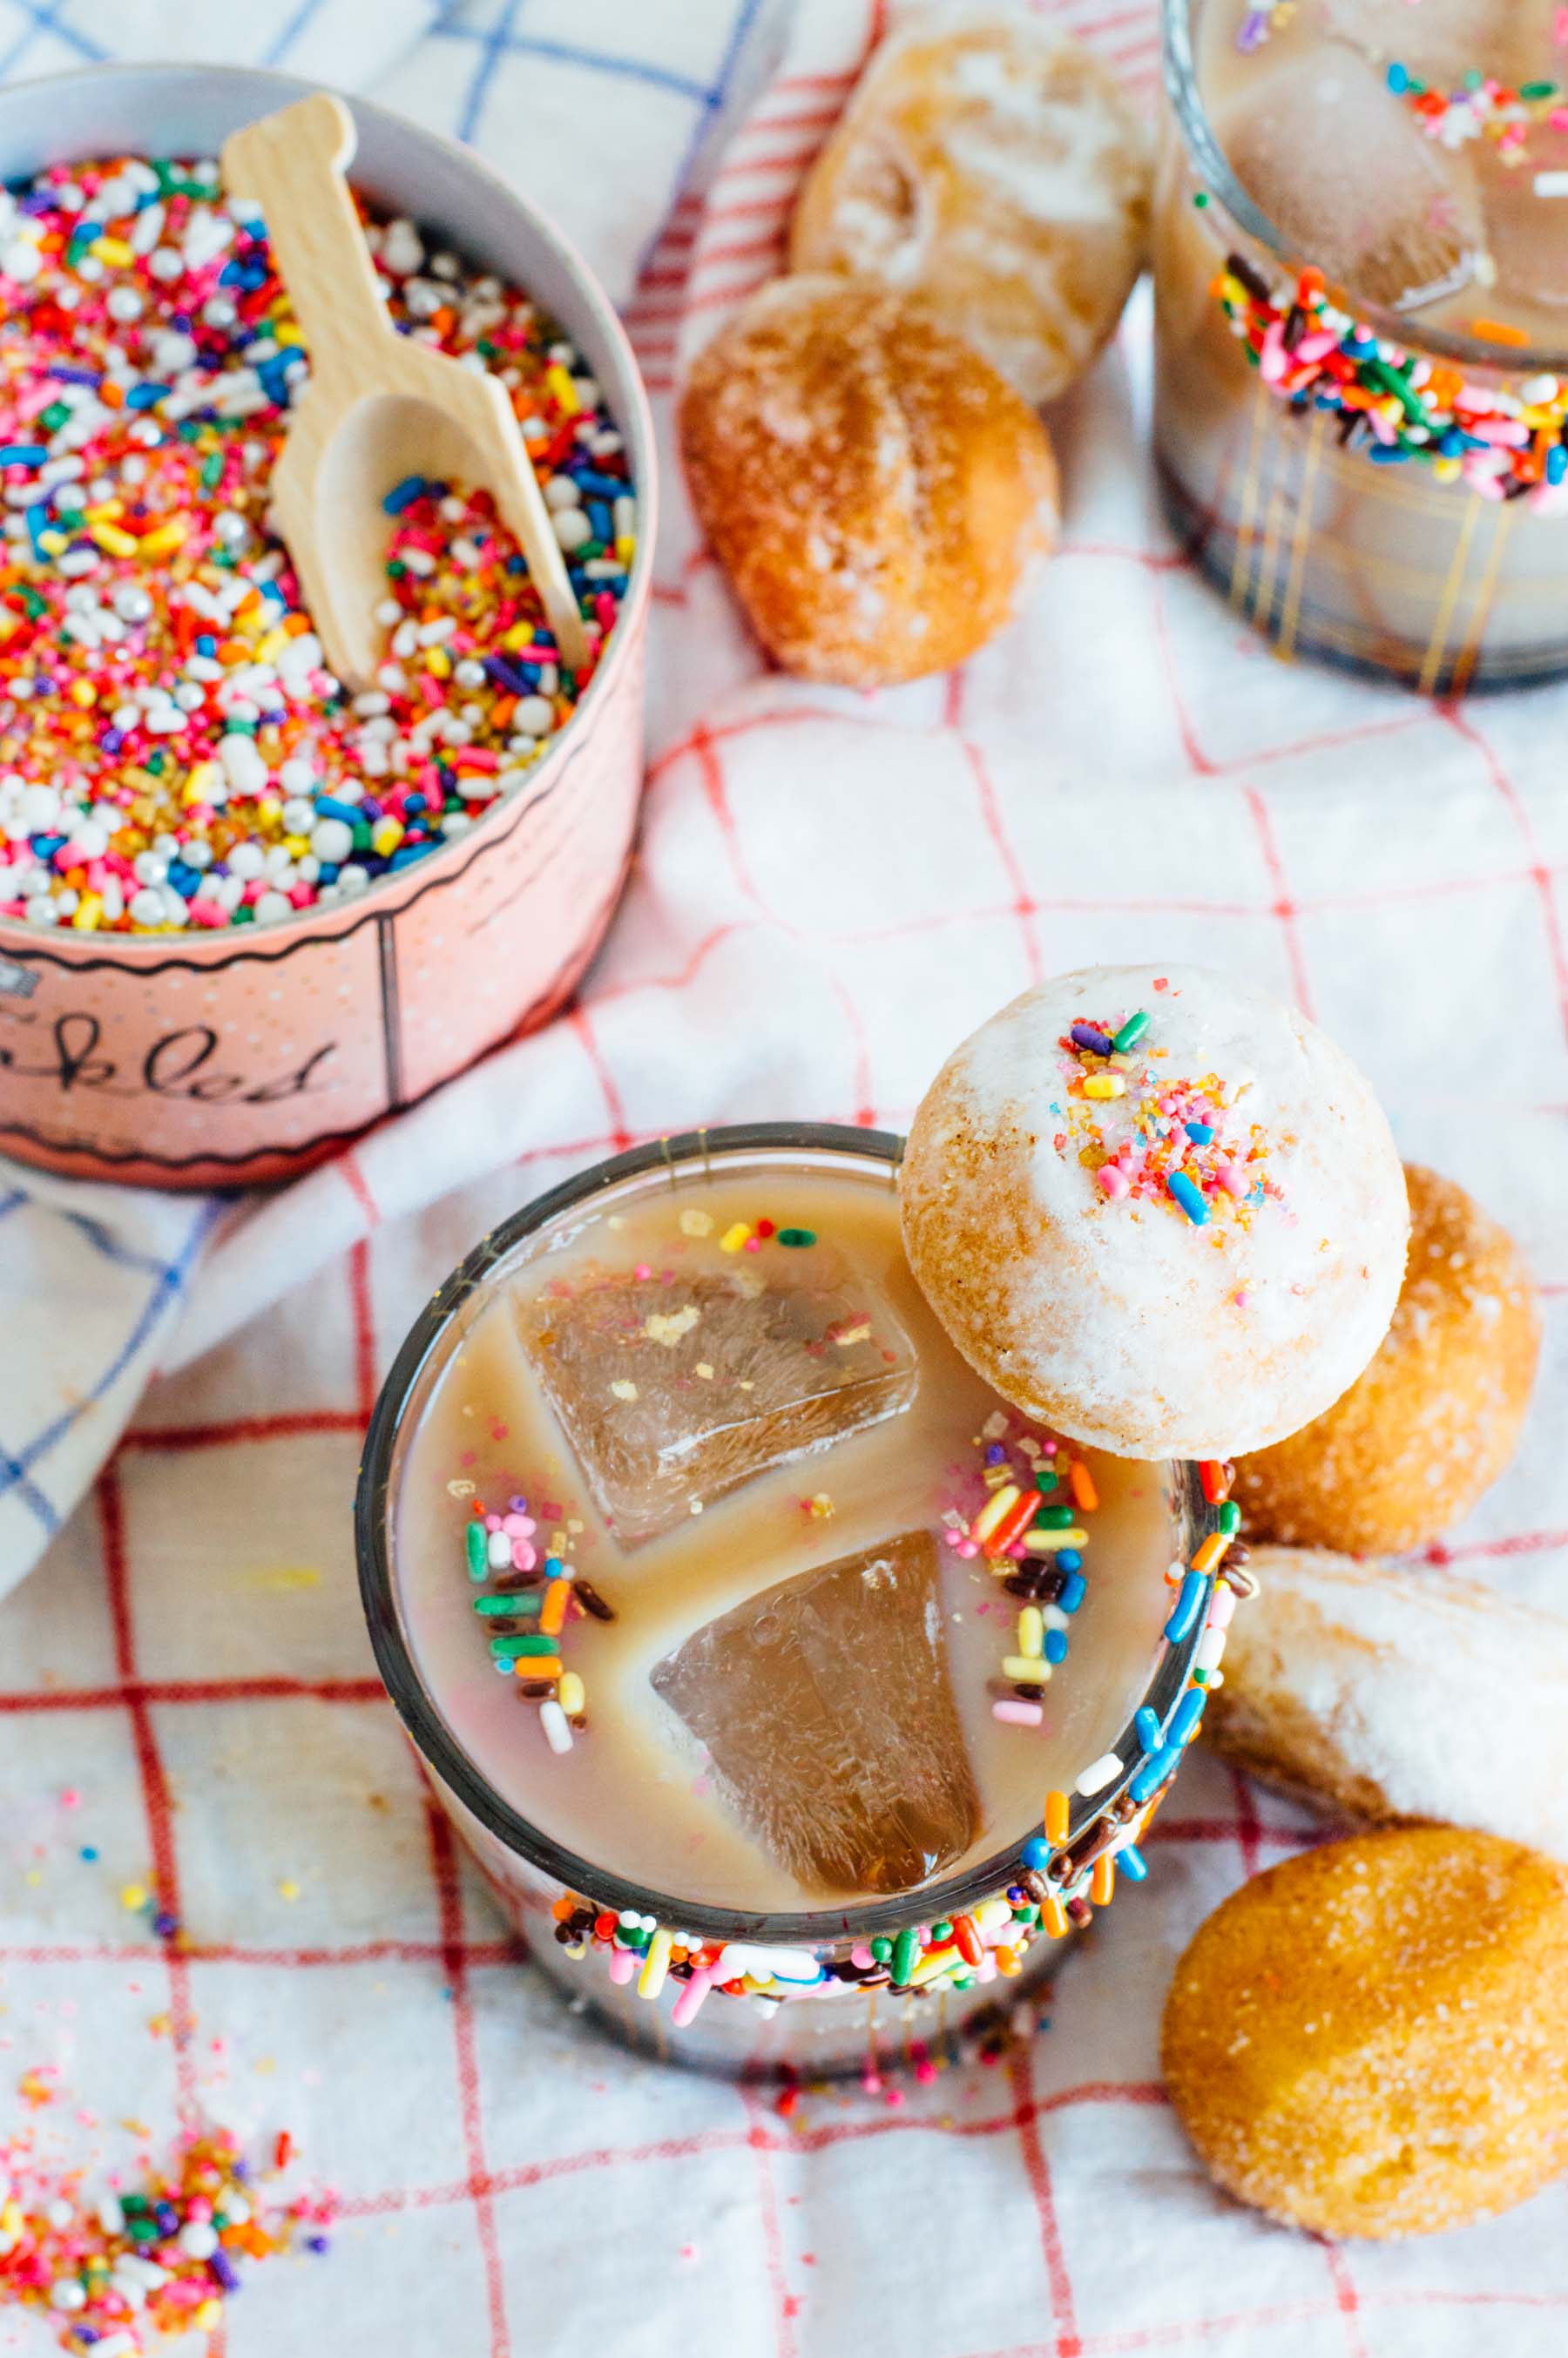 Coffee Milk Punch with coffee tequila and mini doughnuts on the side | bygabriella.co